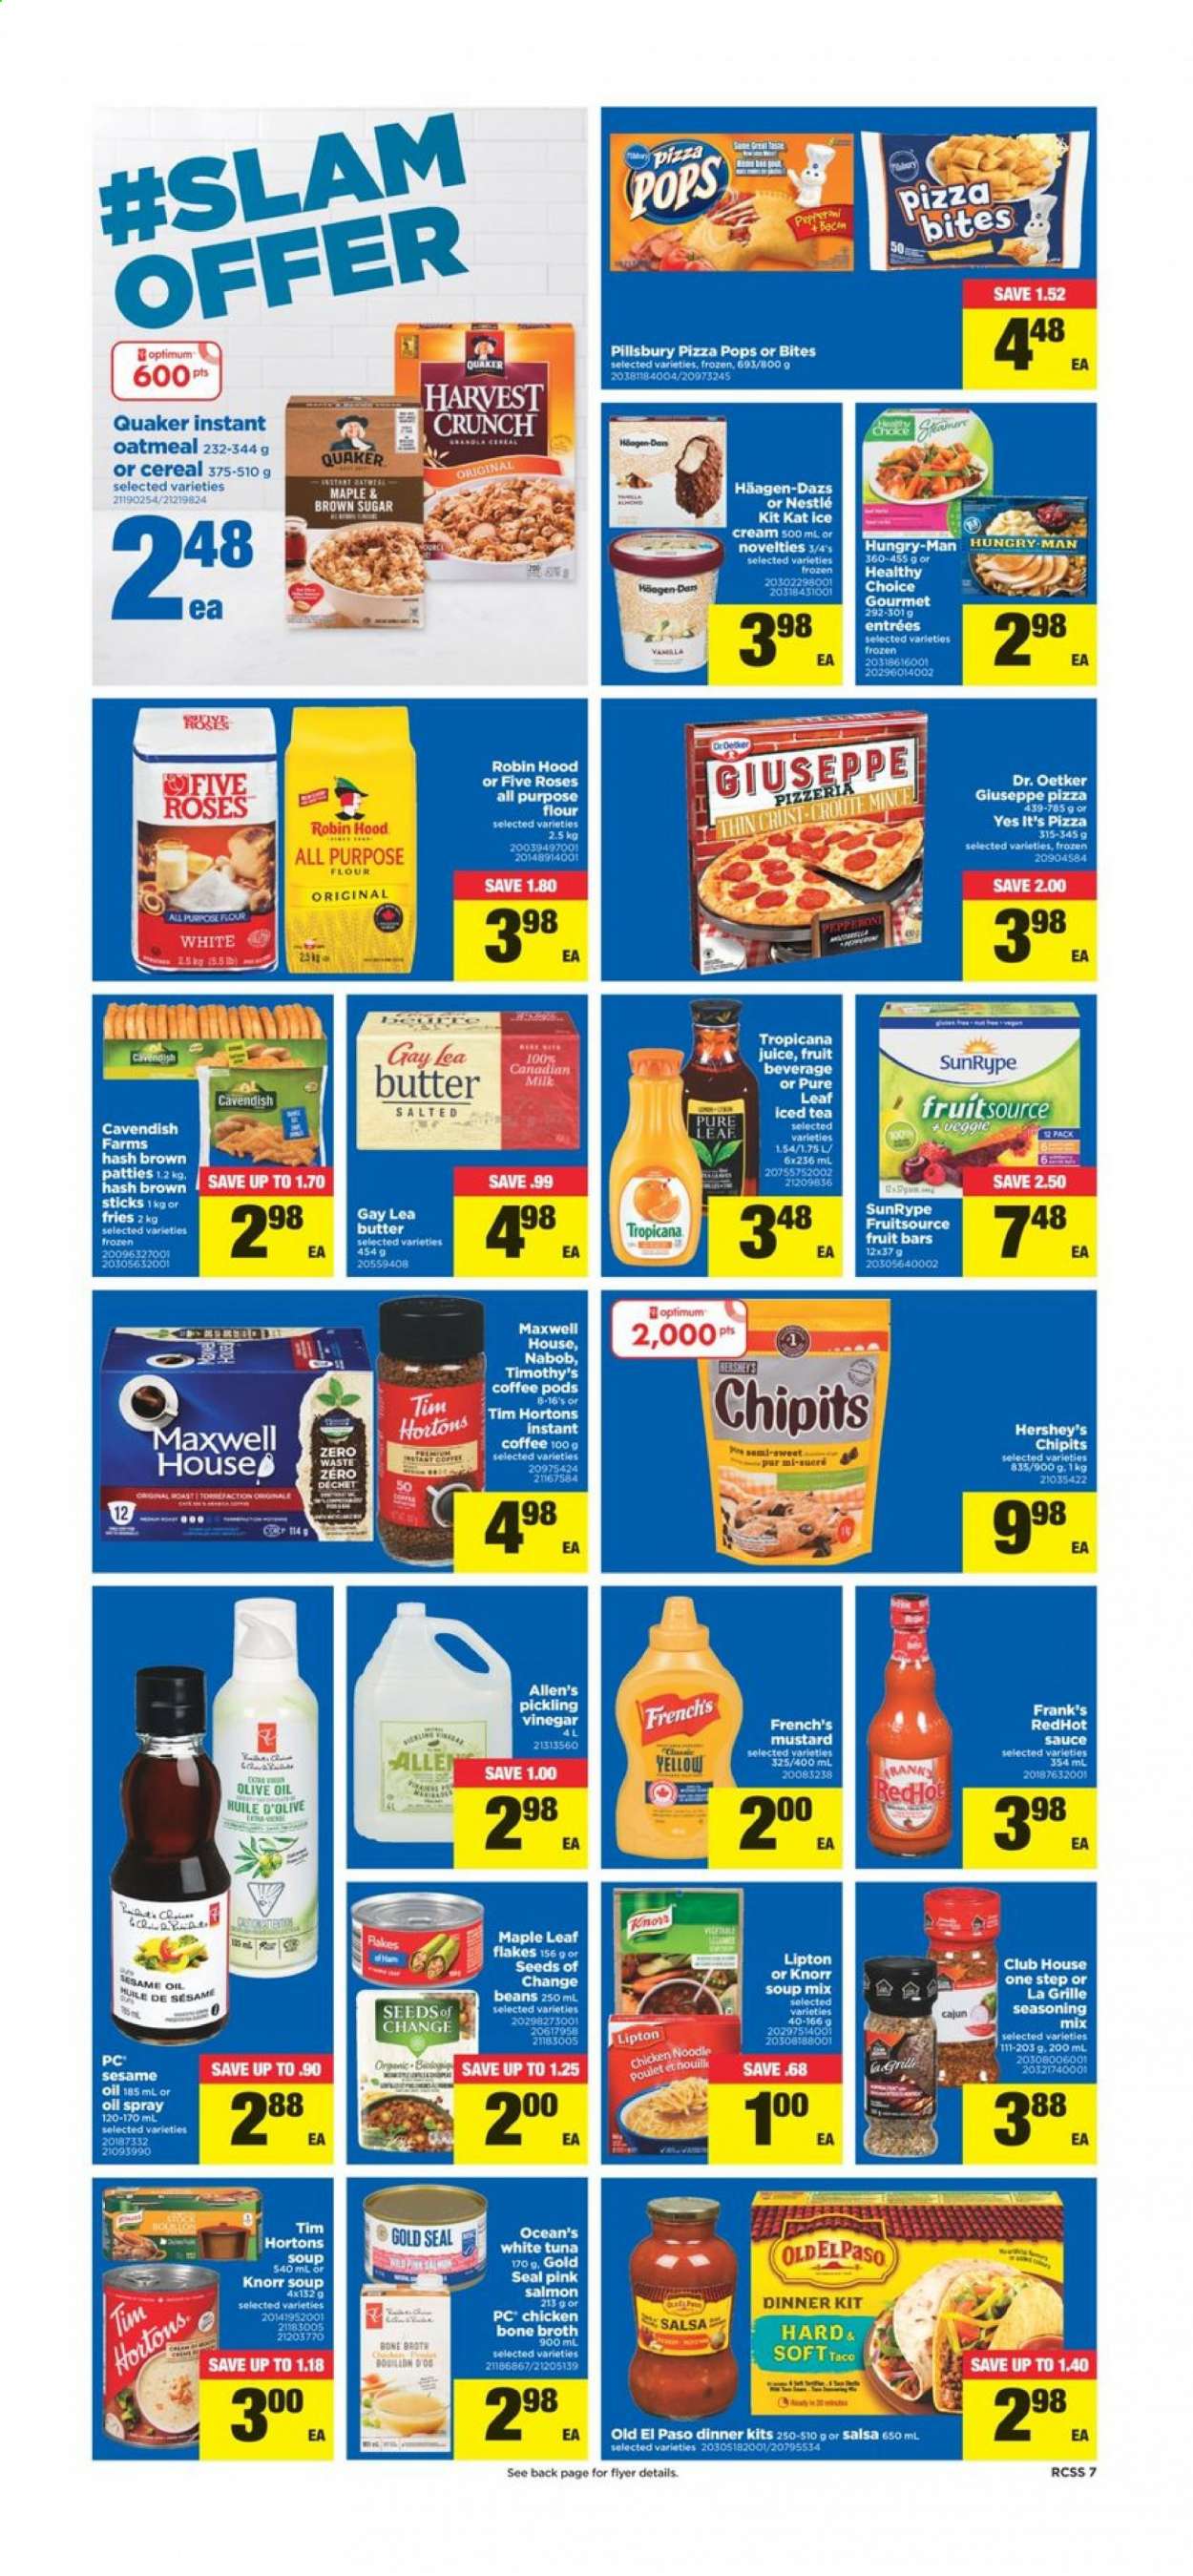 thumbnail - Real Canadian Superstore Flyer - January 14, 2021 - January 20, 2021 - Sales products - Old El Paso, salmon, tuna, pizza, soup mix, soup, sauce, Pillsbury, dinner kit, Quaker, noodles, Healthy Choice, pepperoni, Dr. Oetker, milk, butter, Hershey's, Häagen-Dazs, potato fries, KitKat, all purpose flour, flour, oatmeal, broth, spice, mustard, salsa, sesame oil, vinegar, olive oil, oil, juice, ice tea, Maxwell House, Pure Leaf, coffee pods, instant coffee, Optimum, Knorr, Nestlé. Page 7.